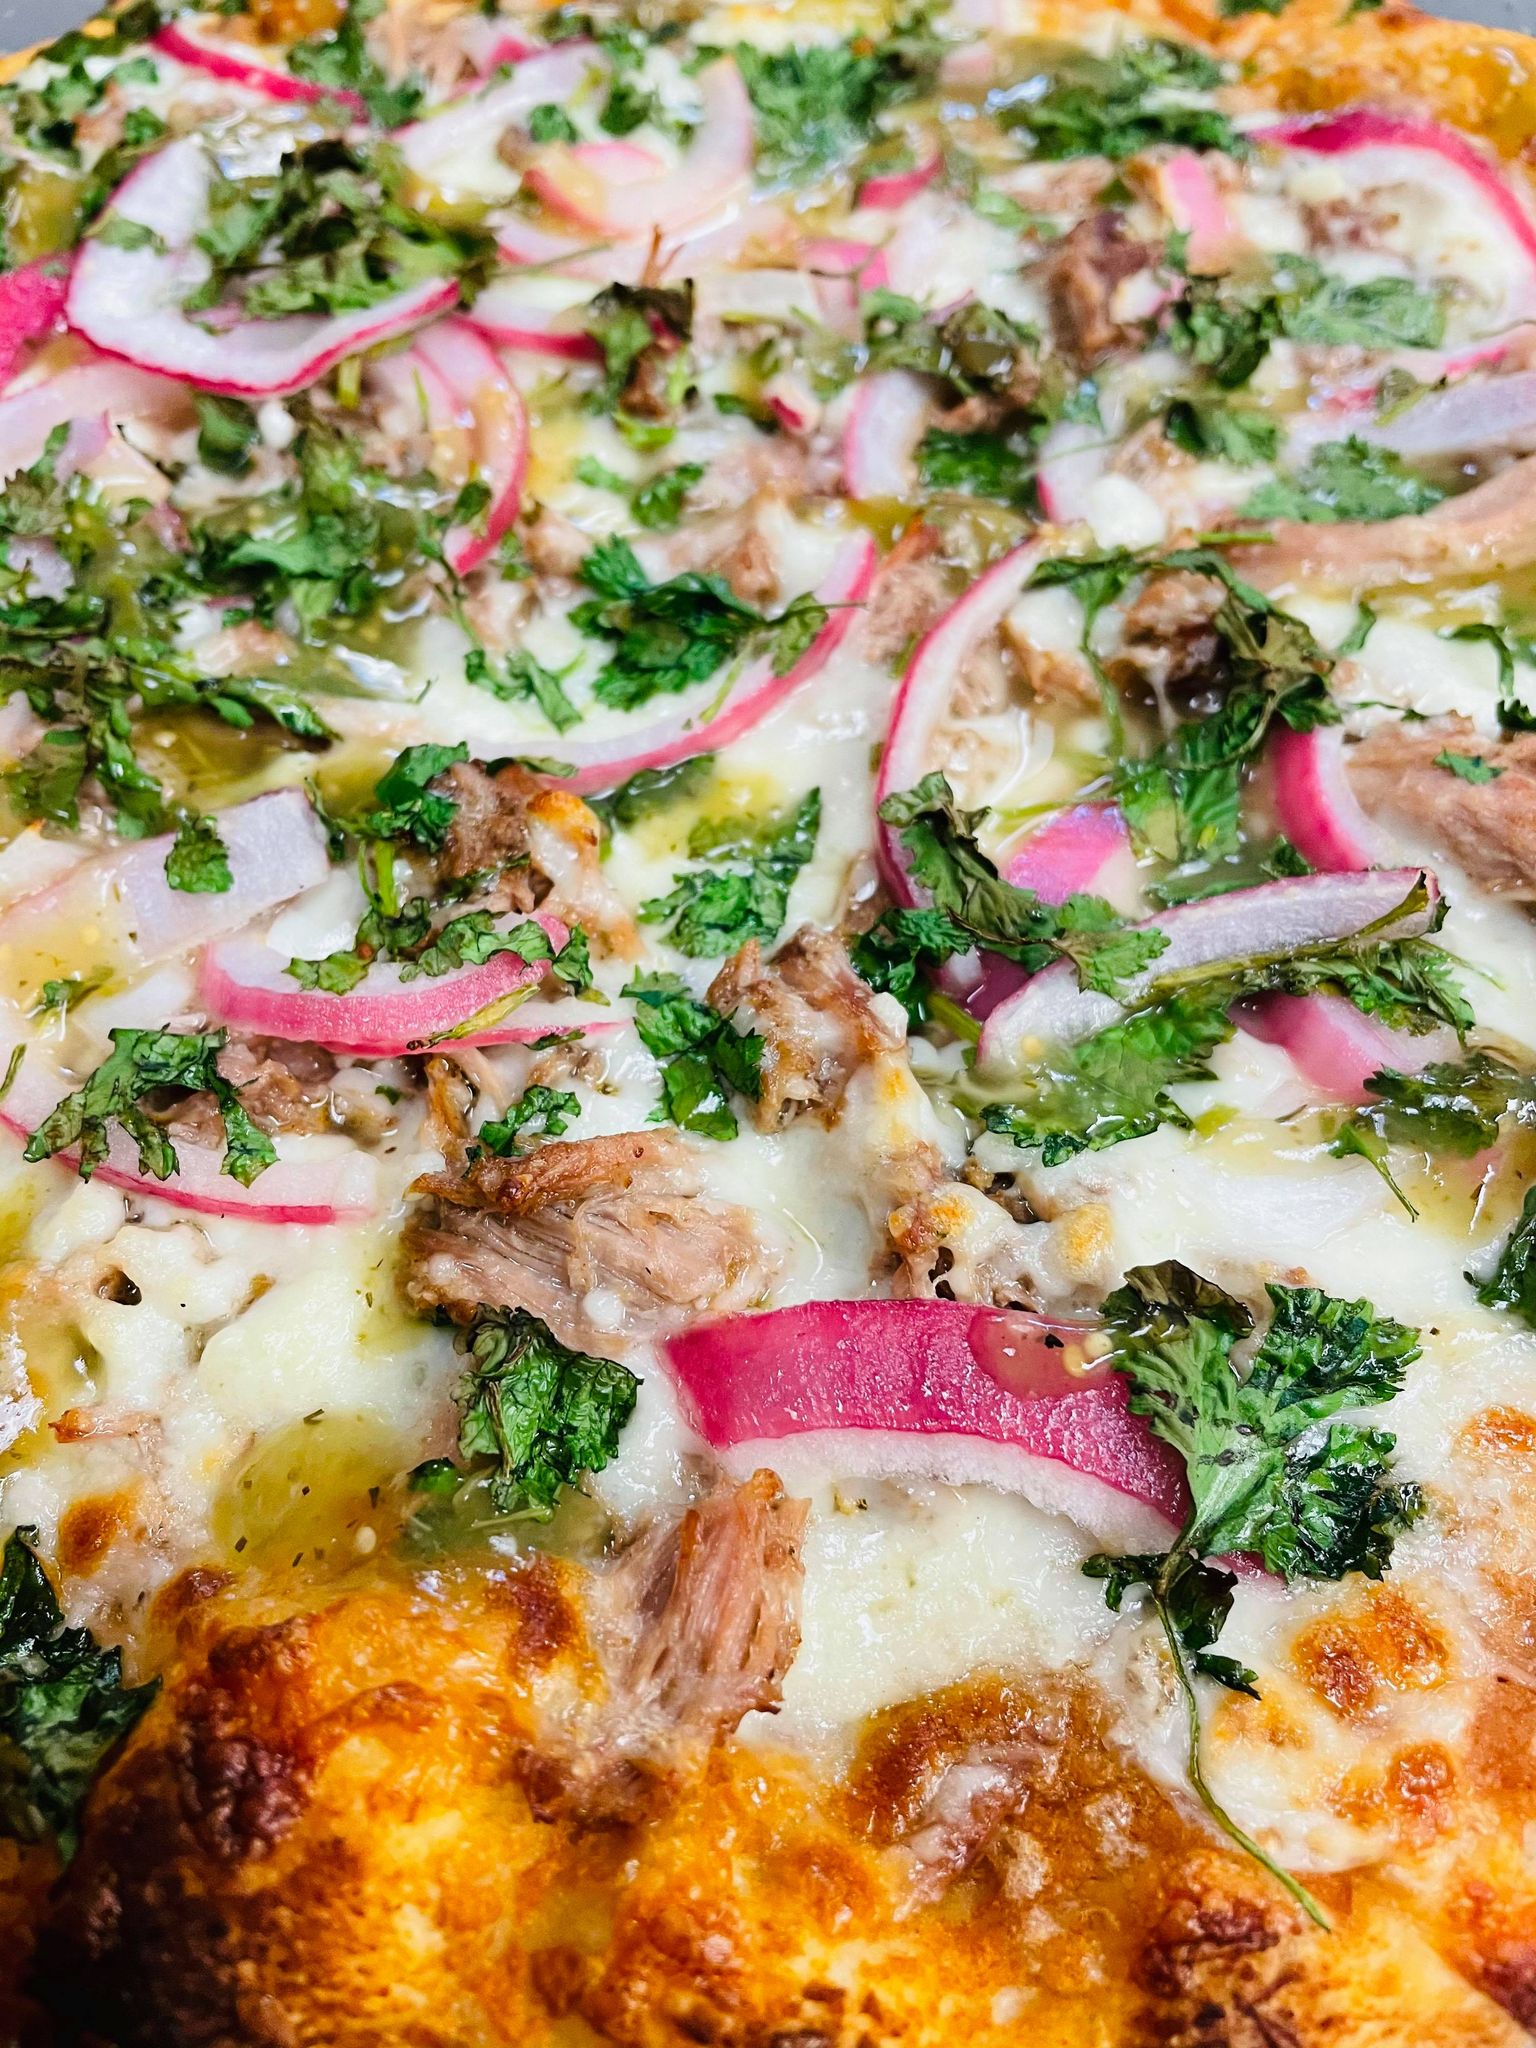 Carnitas Pizza - fresh locally sourced ingredients - QC Pizza Mahtomedi MN.